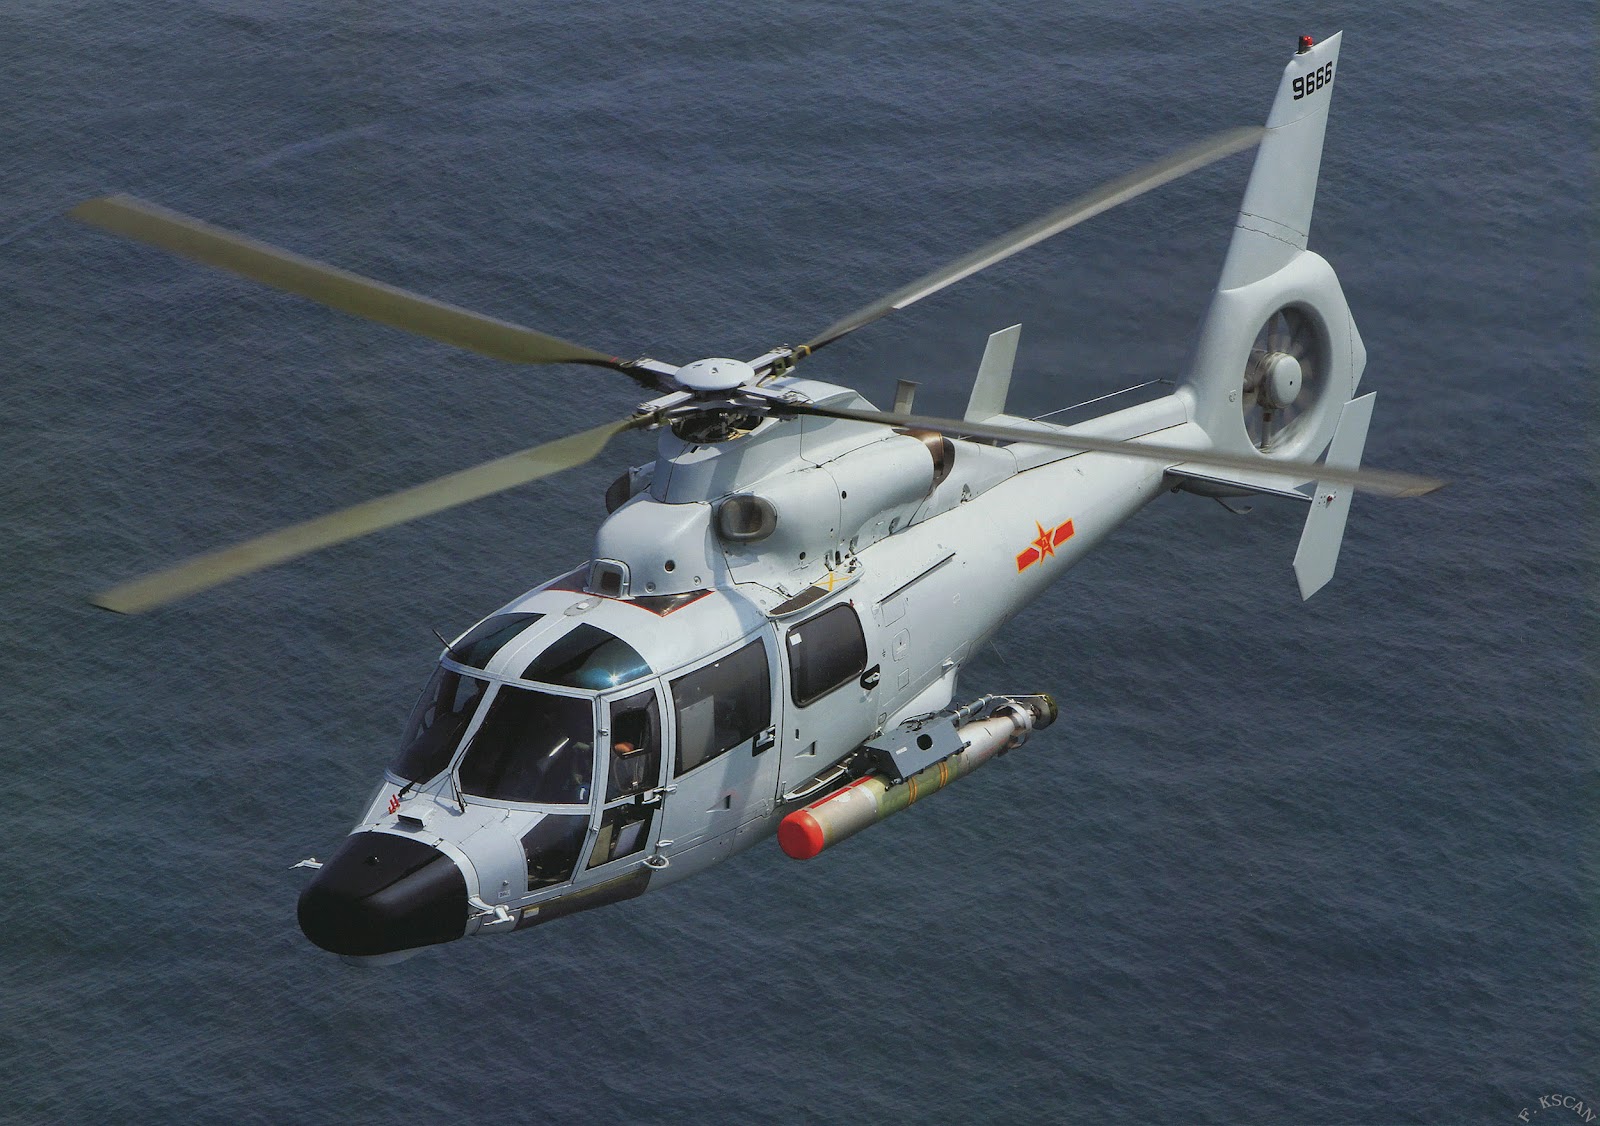 Harbin+helicopter.+Z-9EC+ASW+Naval+Air+Arm+pulse-compression+radar,+low+frequency+dipping+sonar,+radar+warning+receiver+and+doppler+navigation+system,+torpedoes+frigates+%283%29.jpg